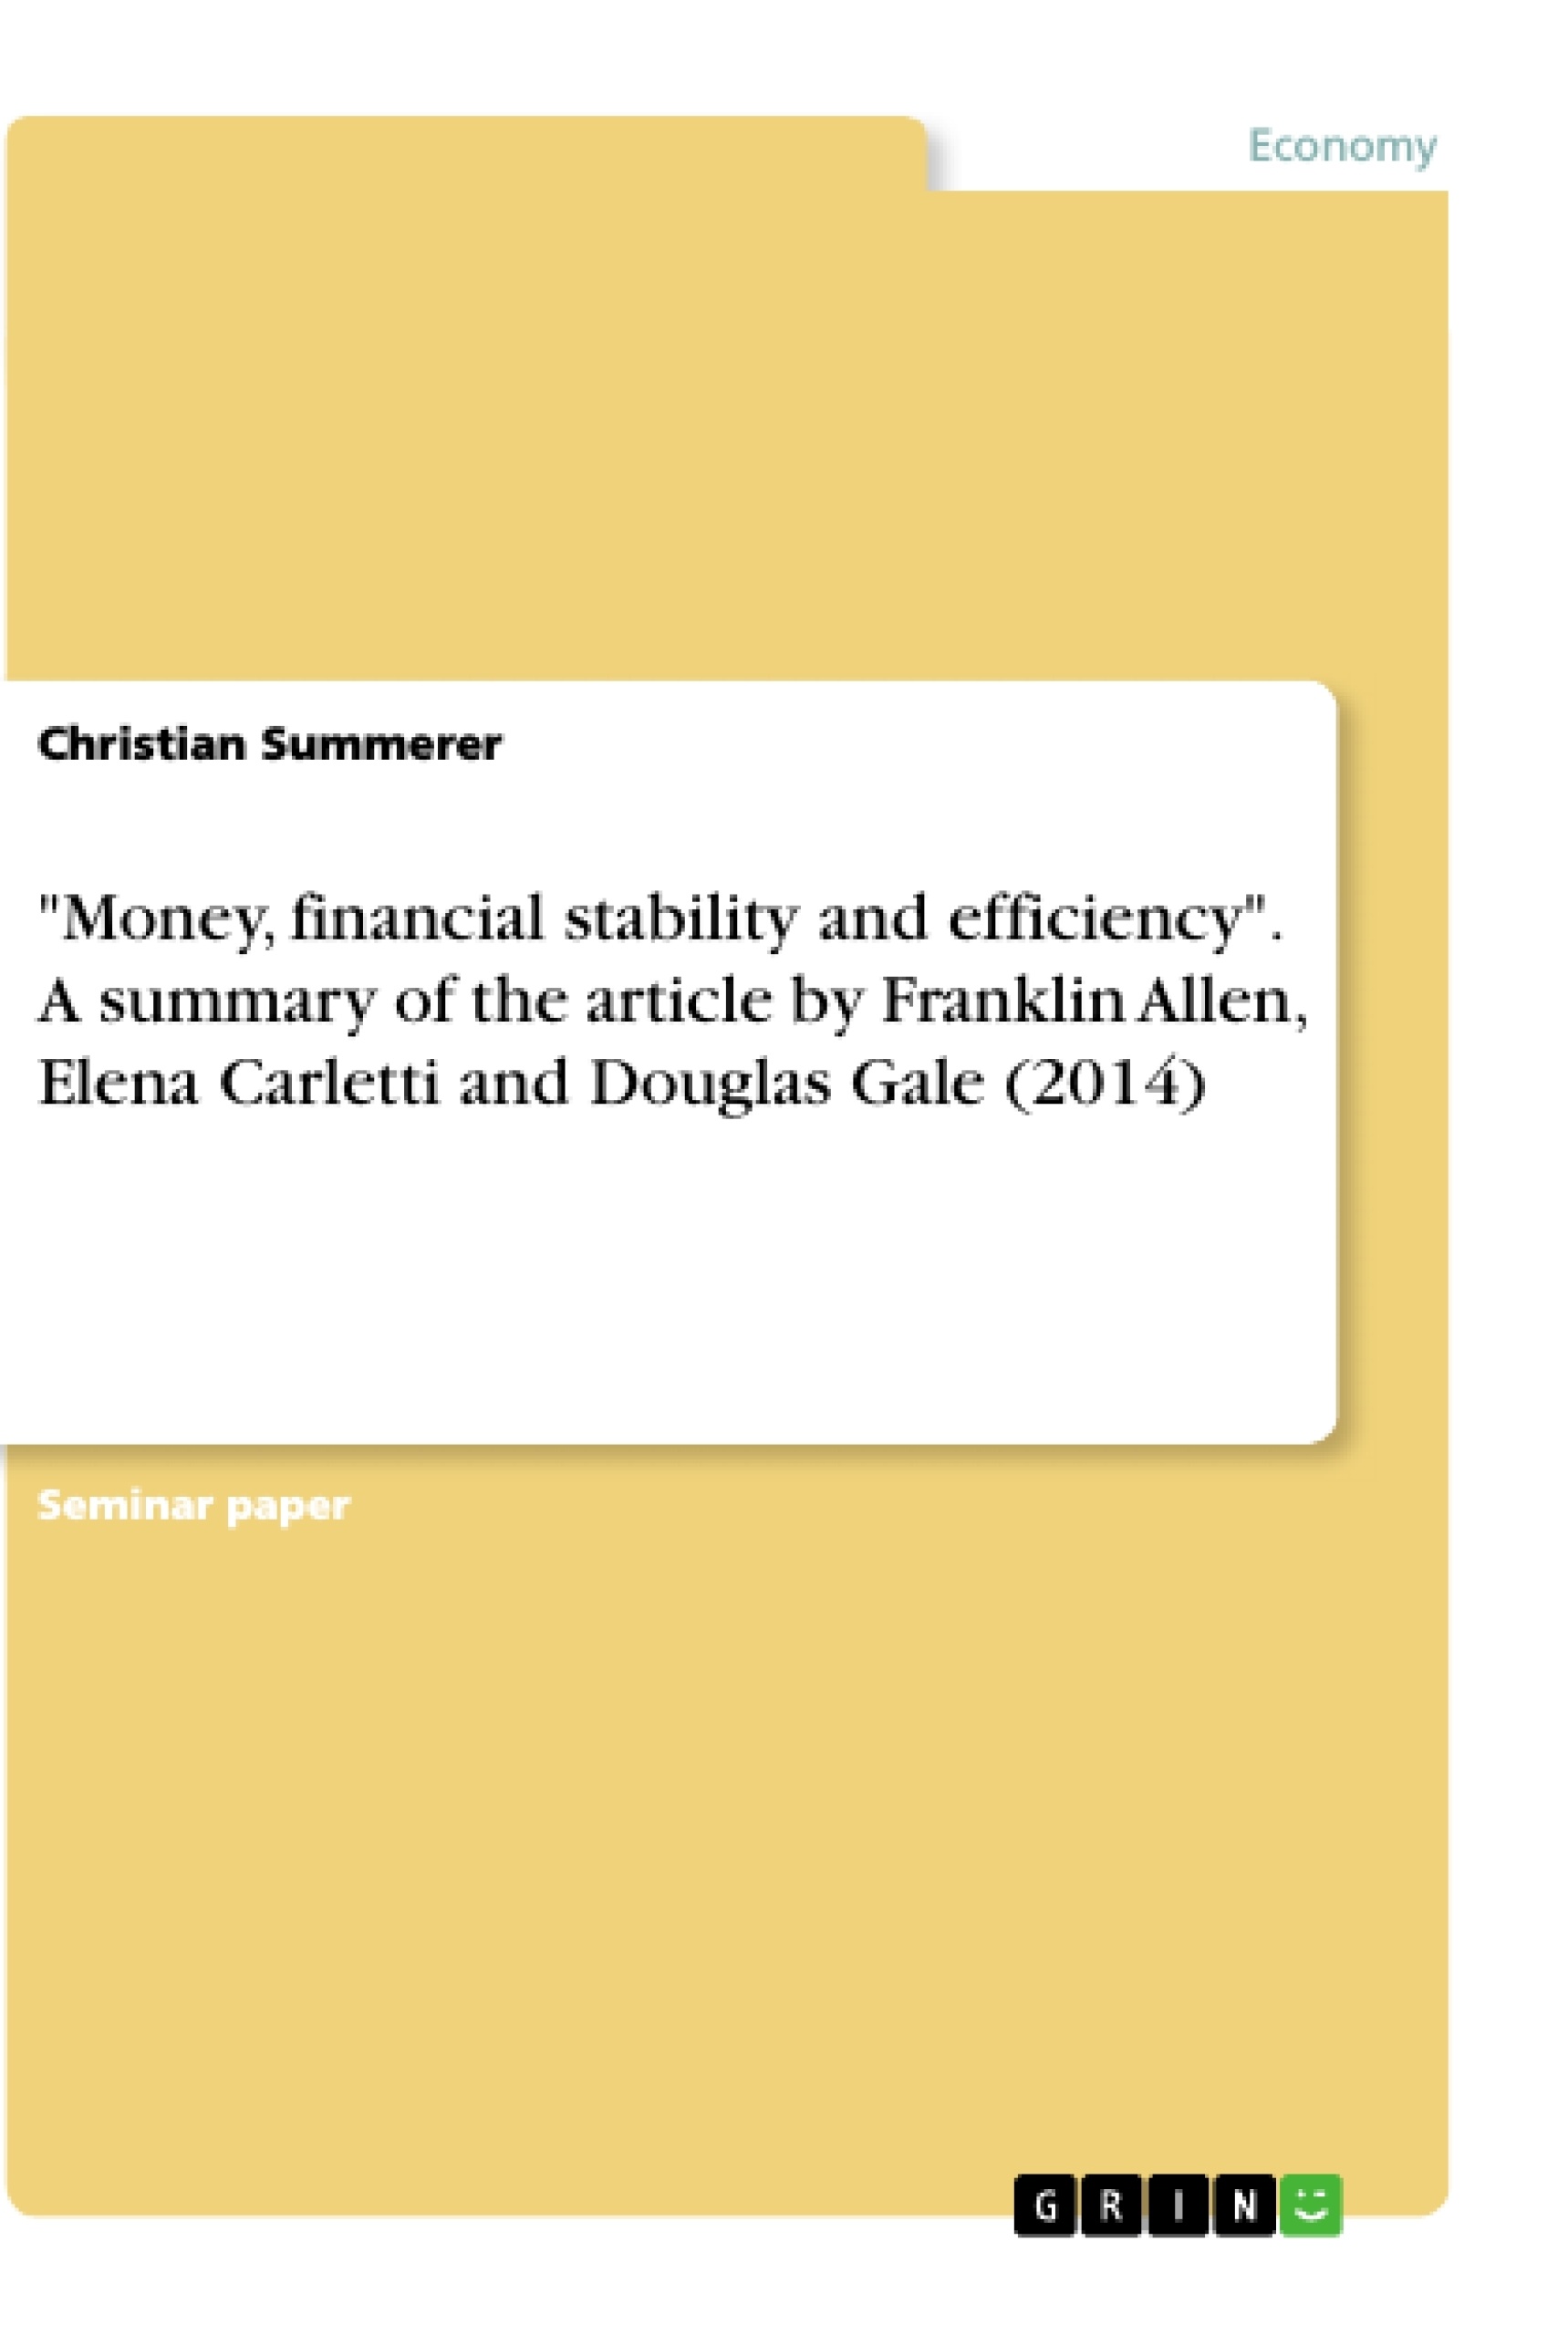 Title: "Money, financial stability and efficiency". A summary of the article by Franklin Allen, Elena Carletti and Douglas Gale (2014)